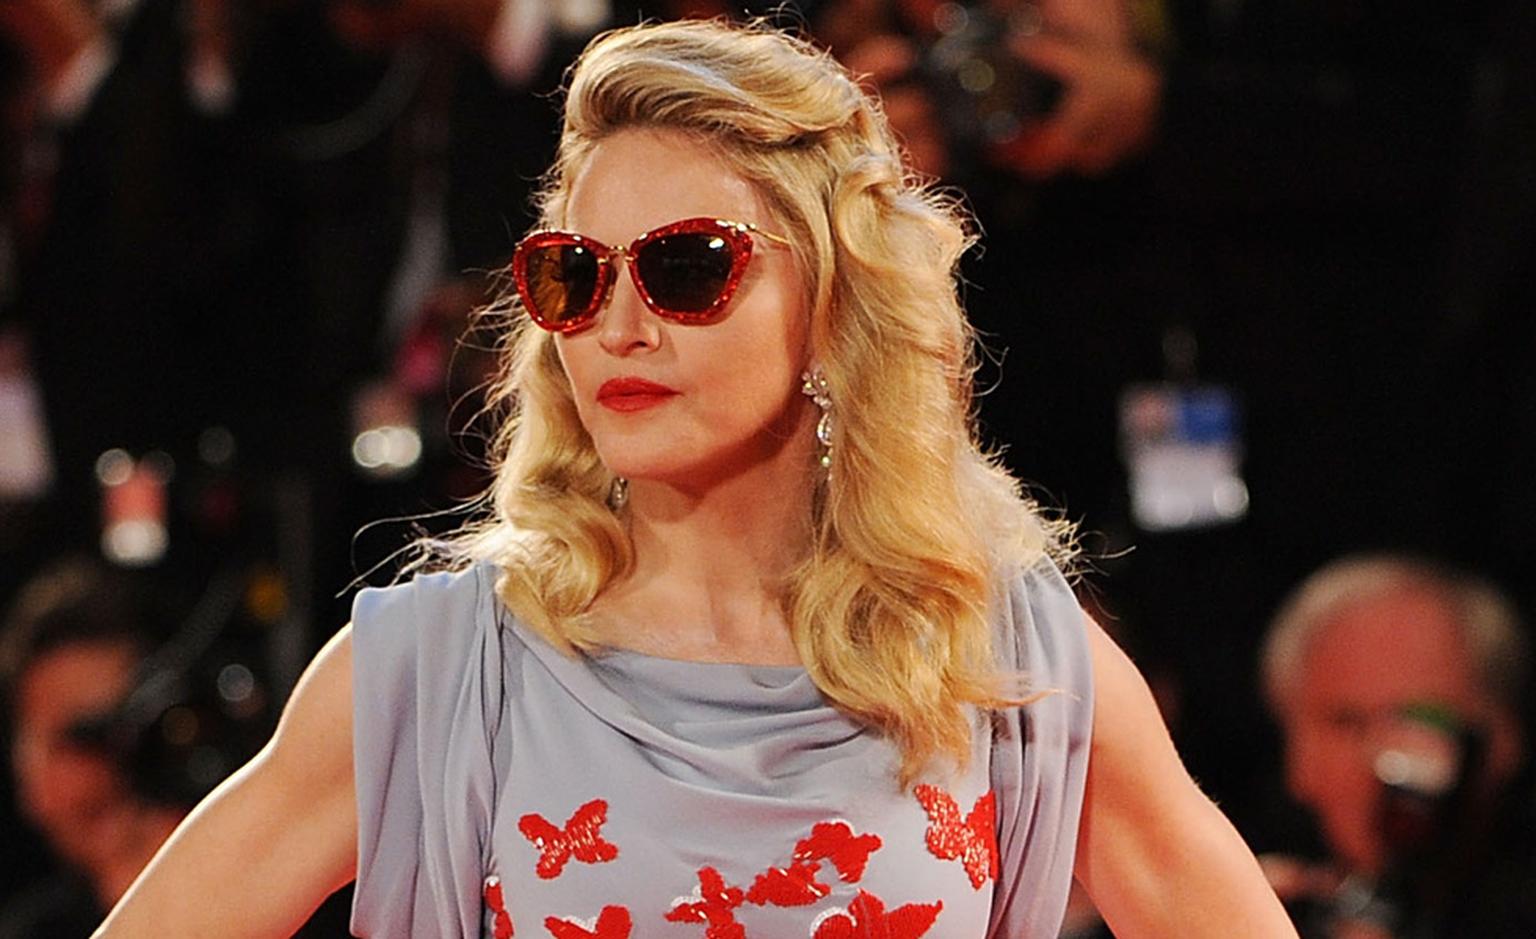 Close up of Madonna at Venice Film Festival 2011 wearing Cartier platinum and diamond pendant earrings